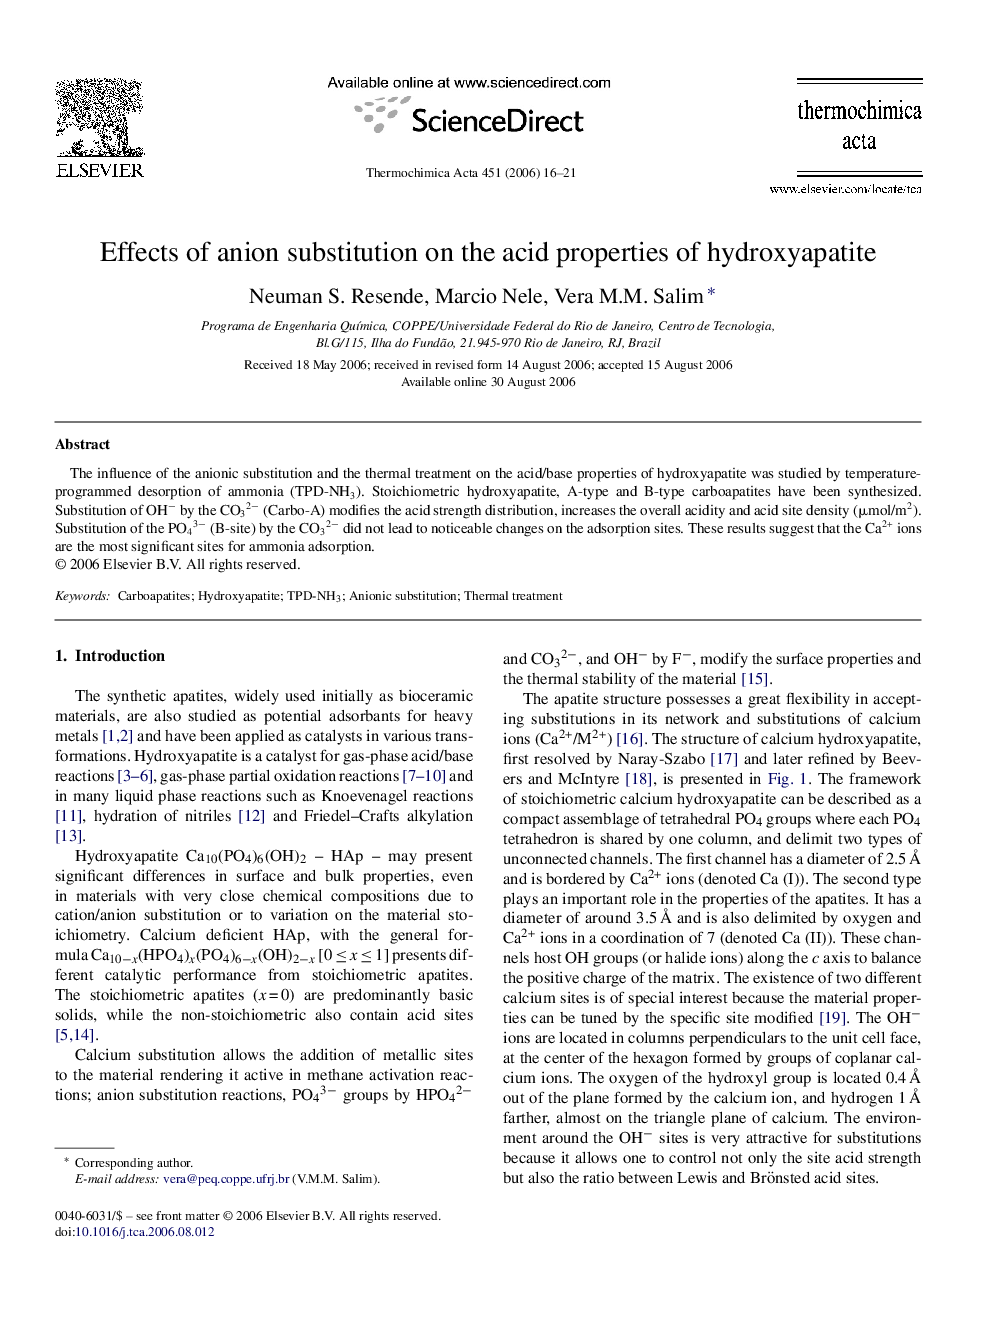 Effects of anion substitution on the acid properties of hydroxyapatite